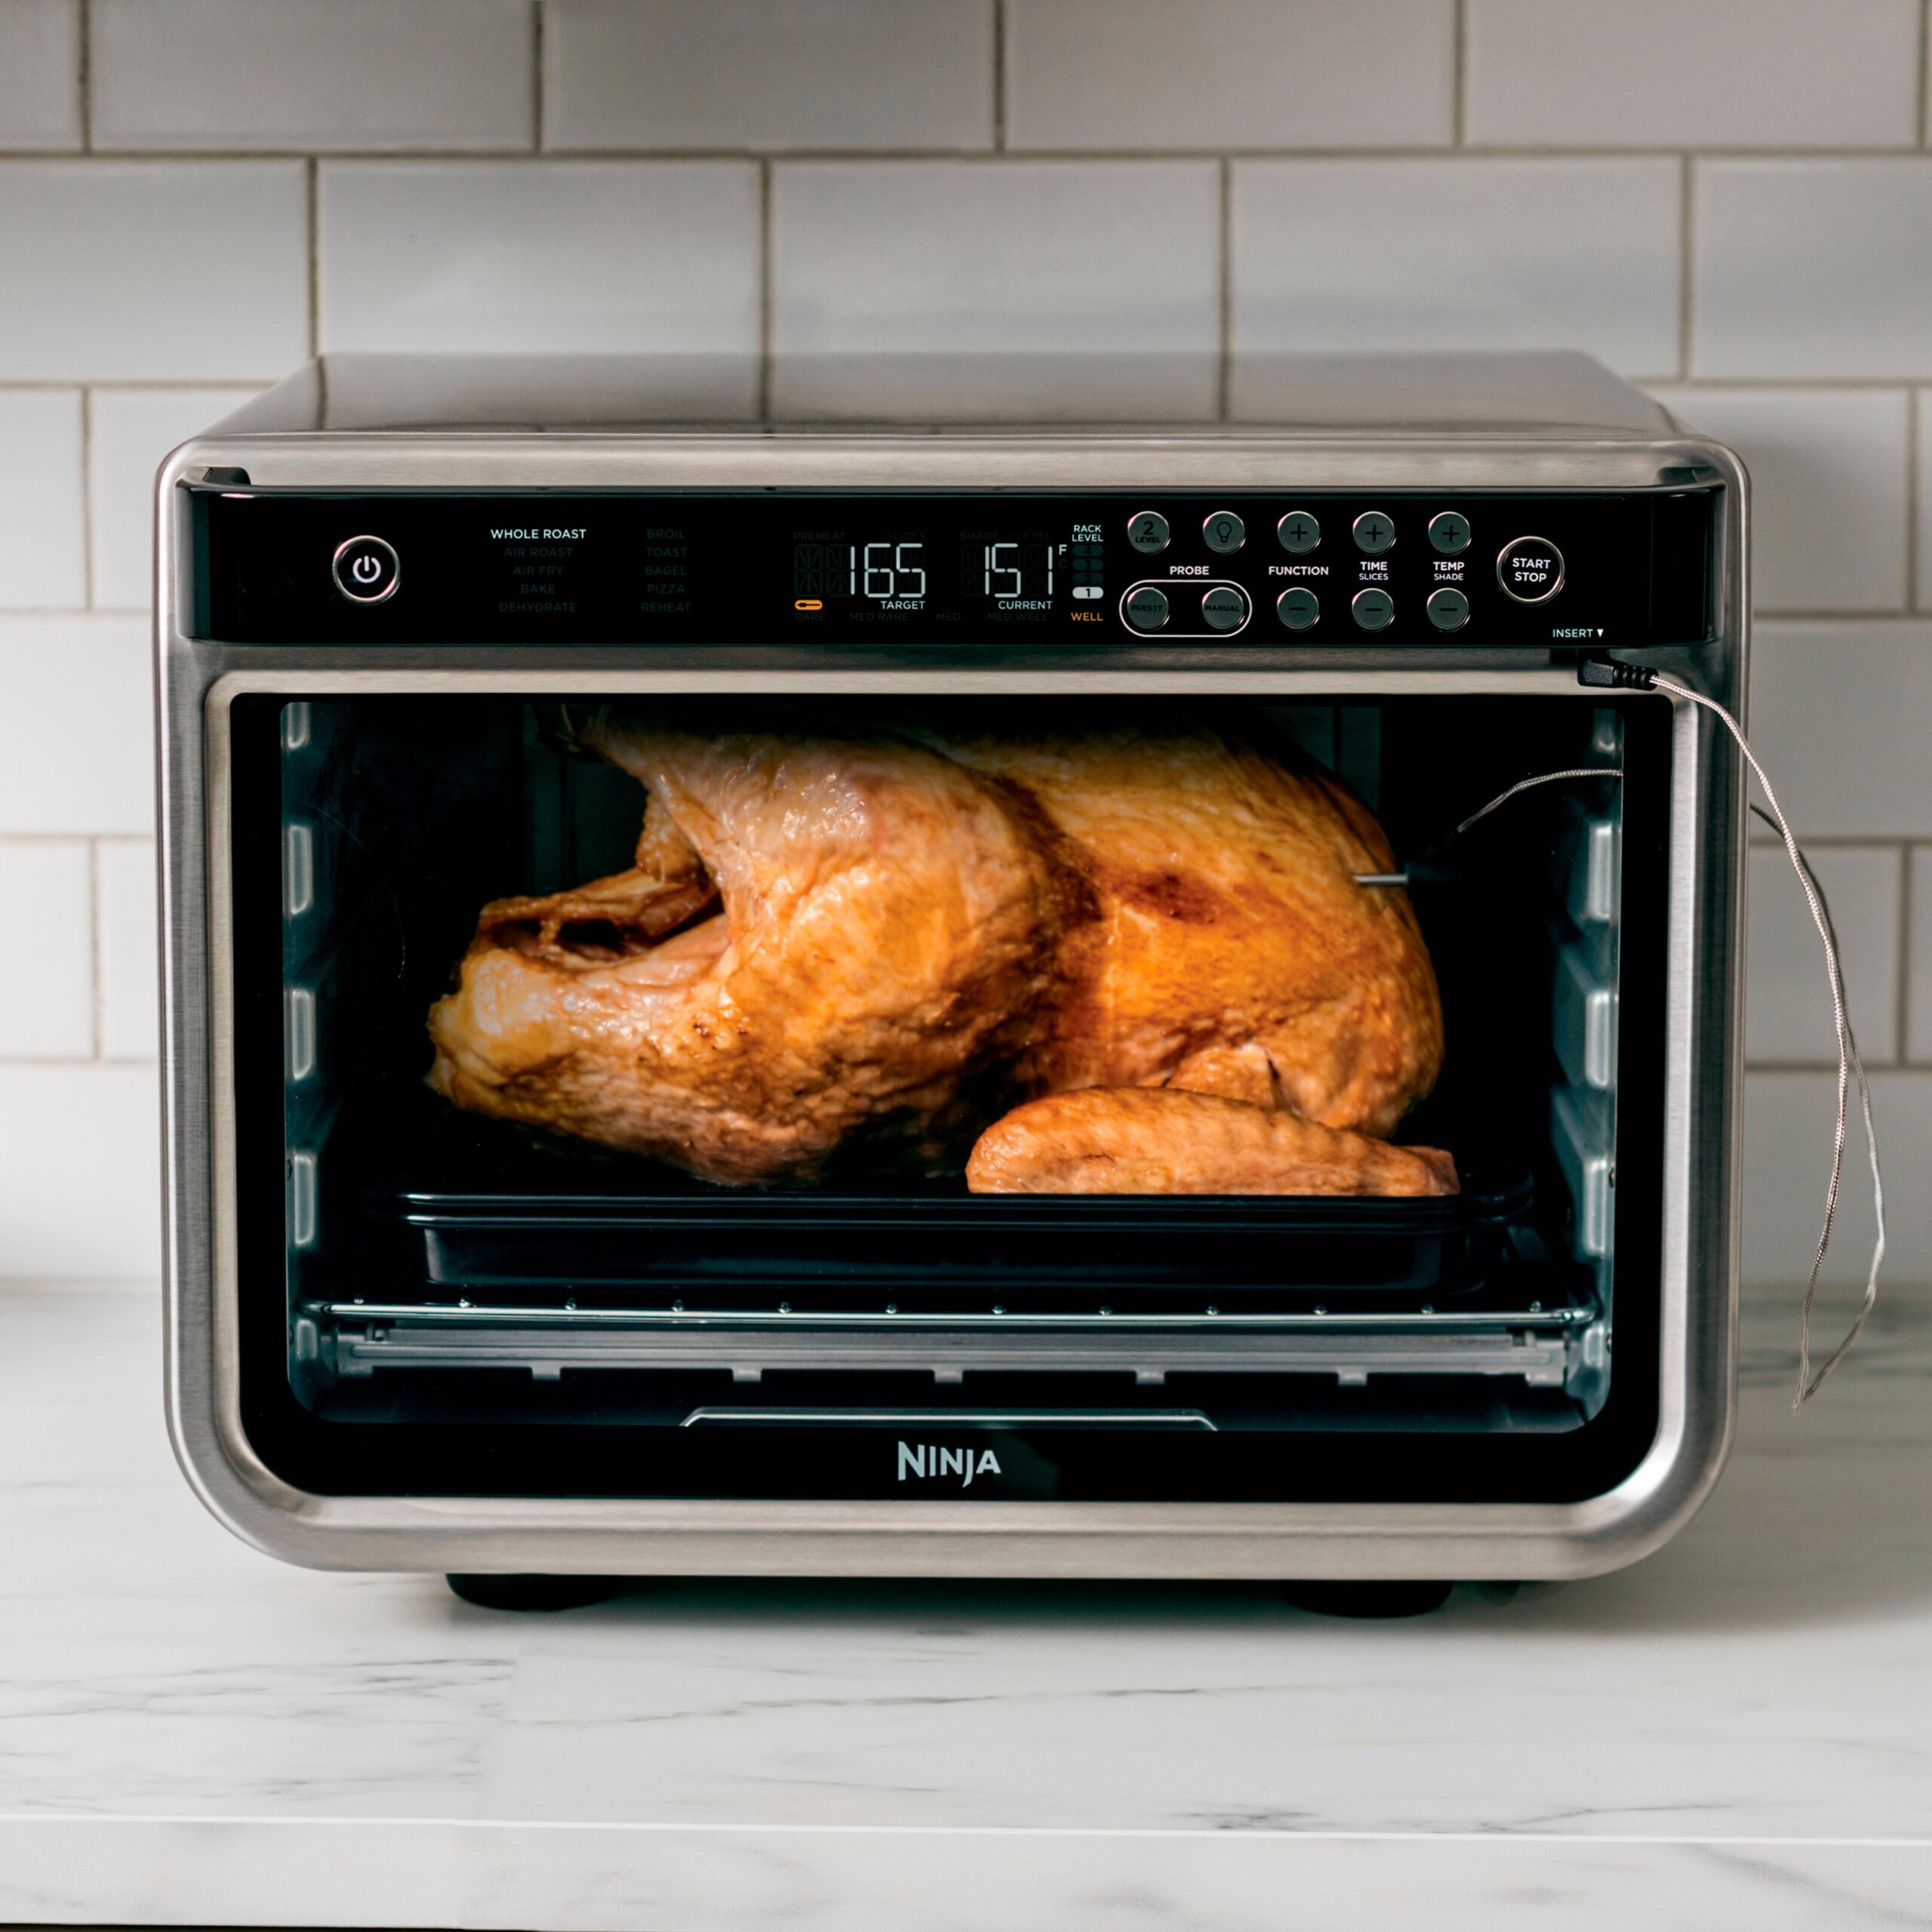 https://themarketdepot.com/wp-content/uploads/2023/01/Ninja-Foodi-10-in-1-Smart-XL-Air-Fry-Oven-Stainless-Silver-4-scaled-1.jpg